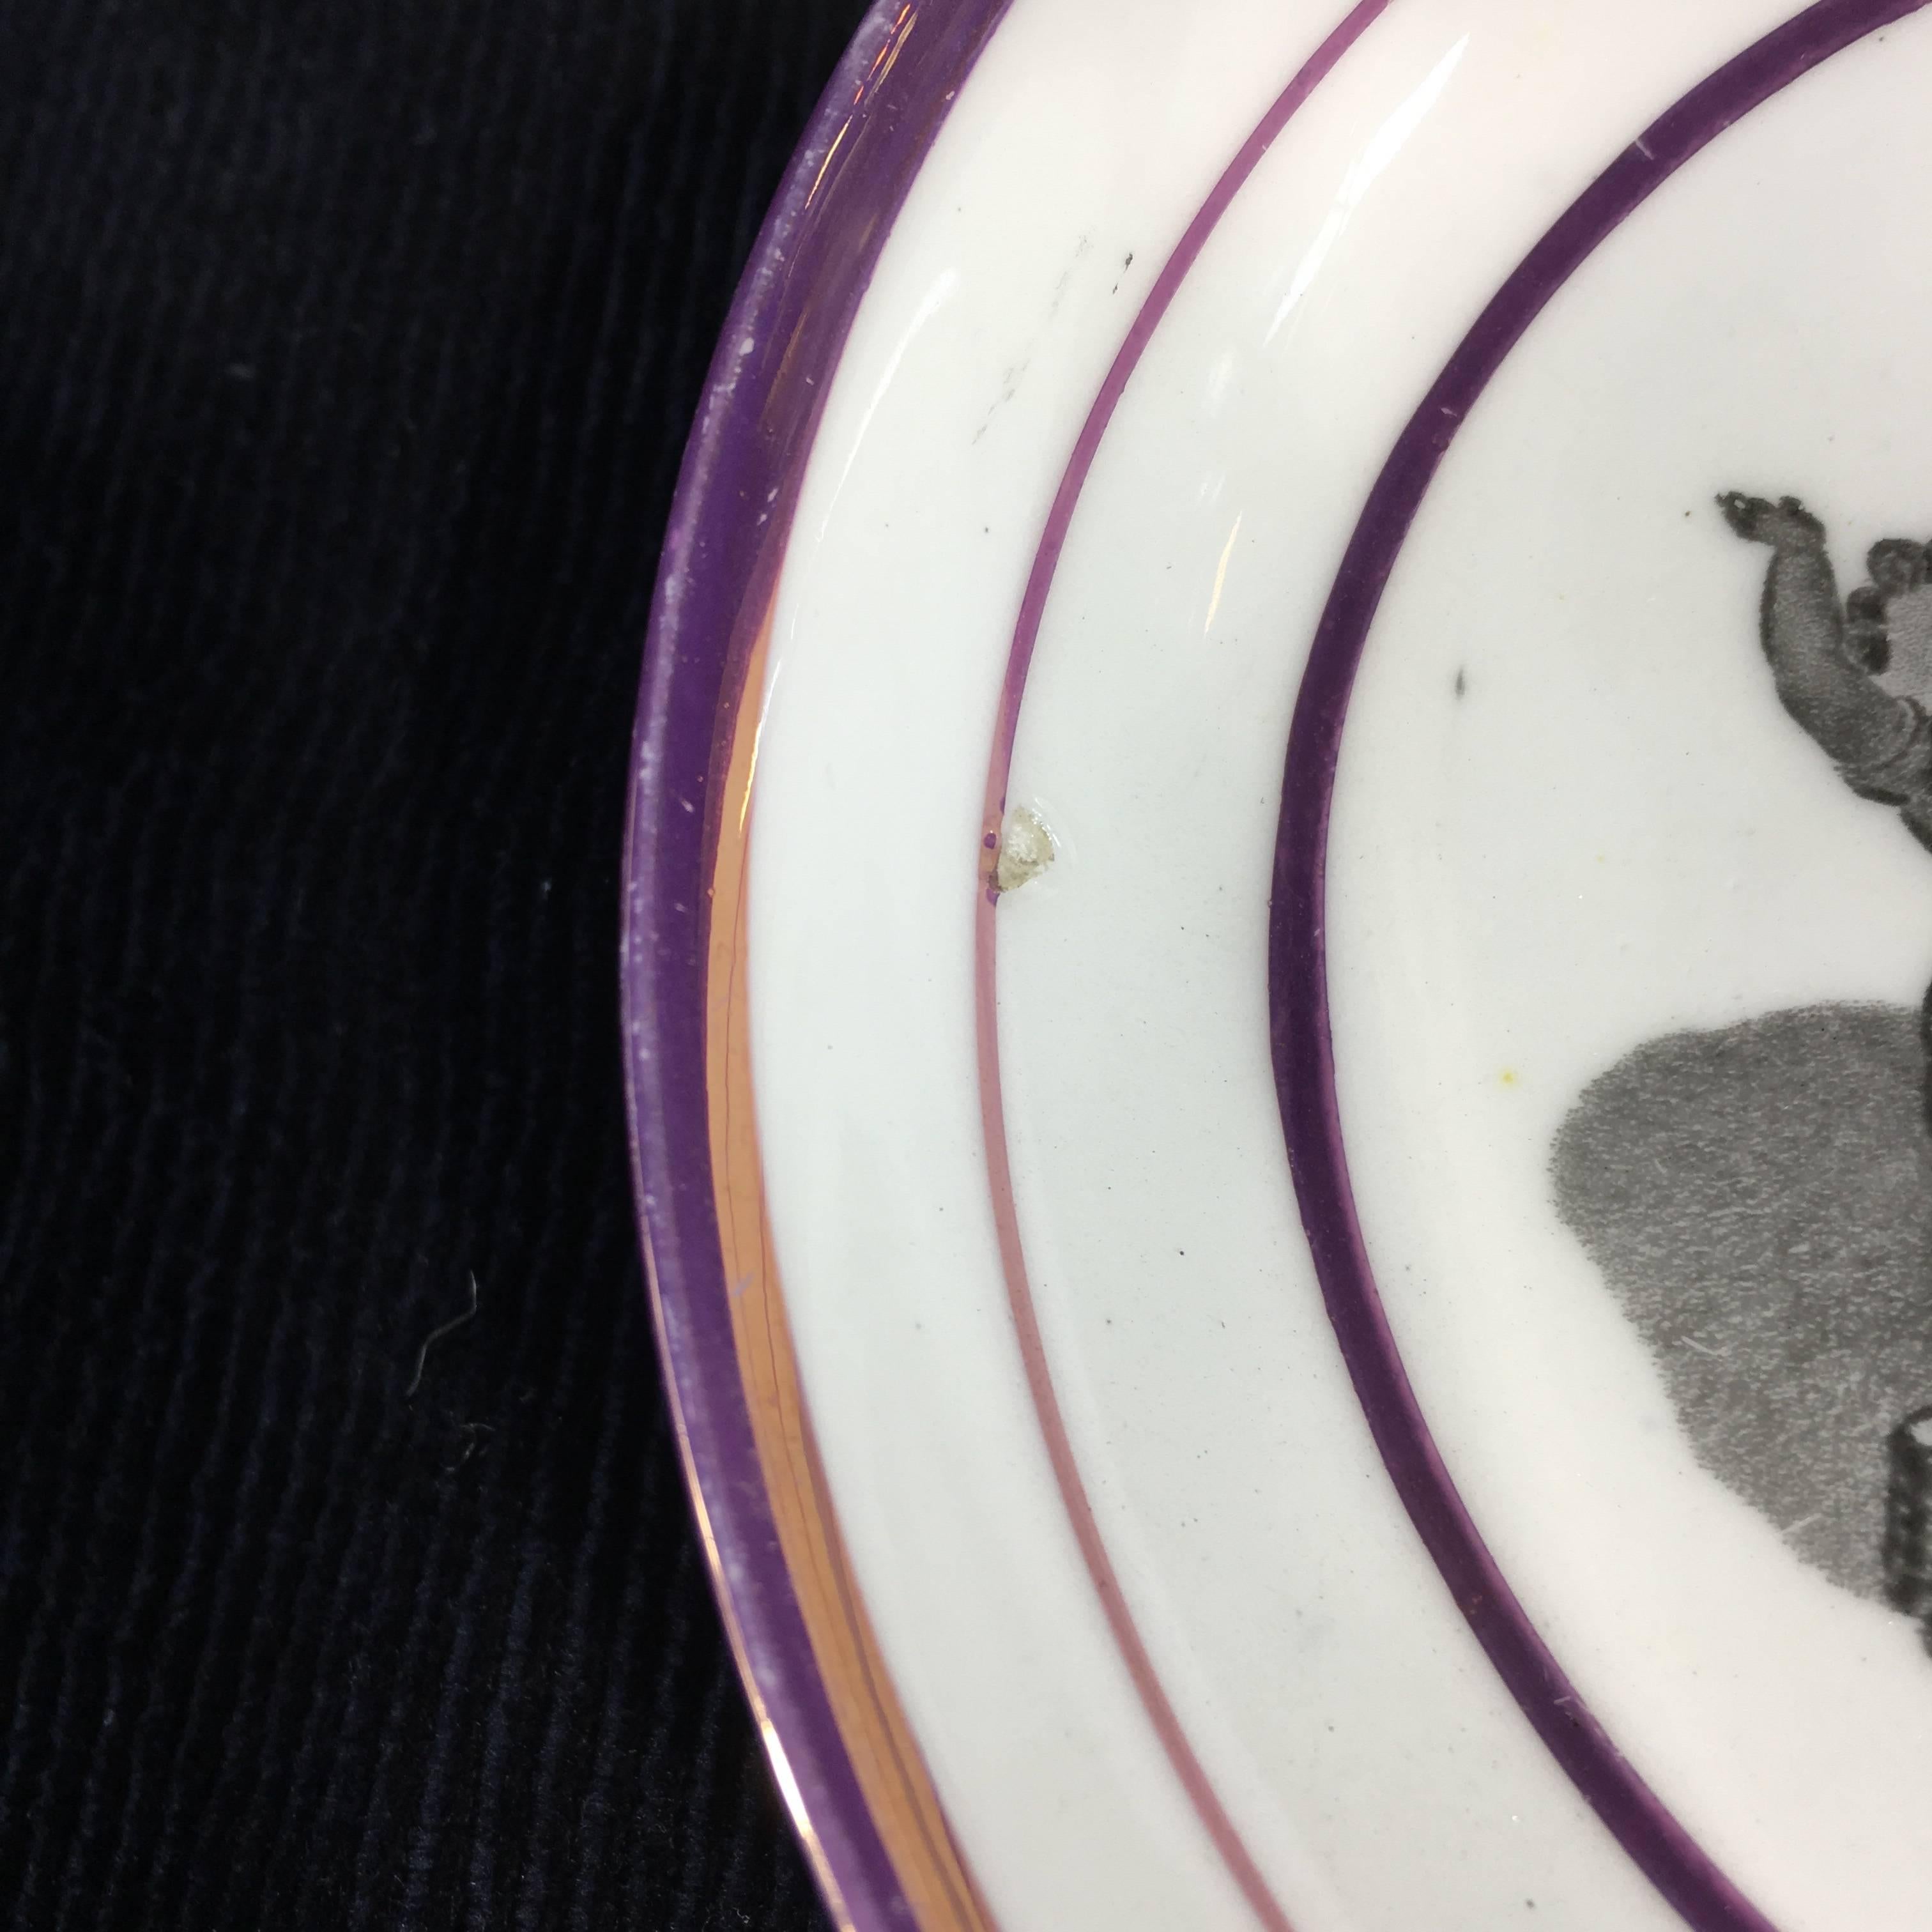 Thomas Wolfe & Co cup and saucer, bat printed with a bucks type print in a purple lustre border,
circa 1810.